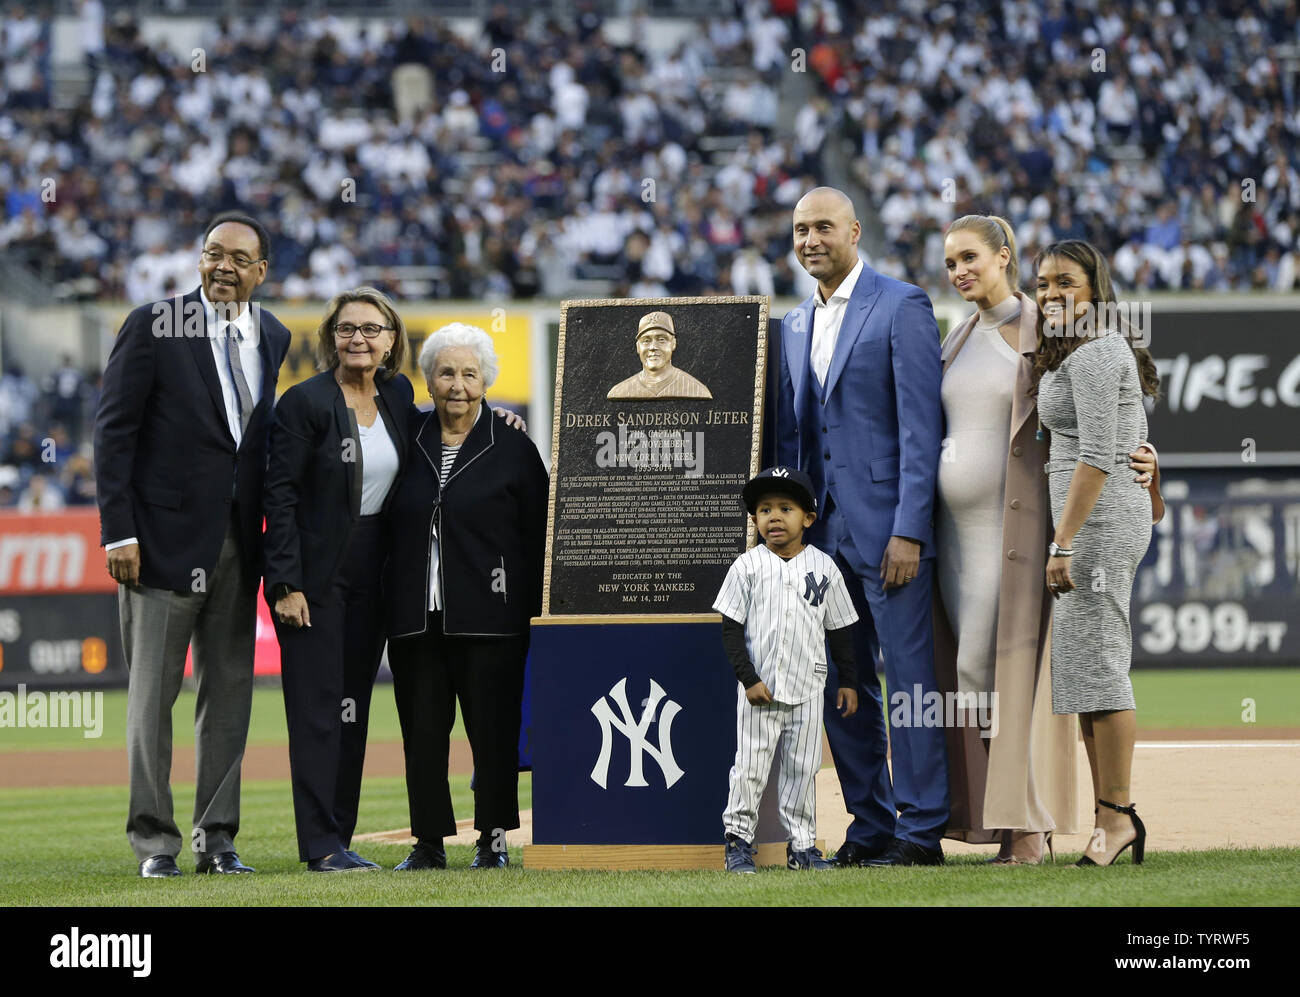 Derek Jeter stands on the field with Hannah Jeter and other